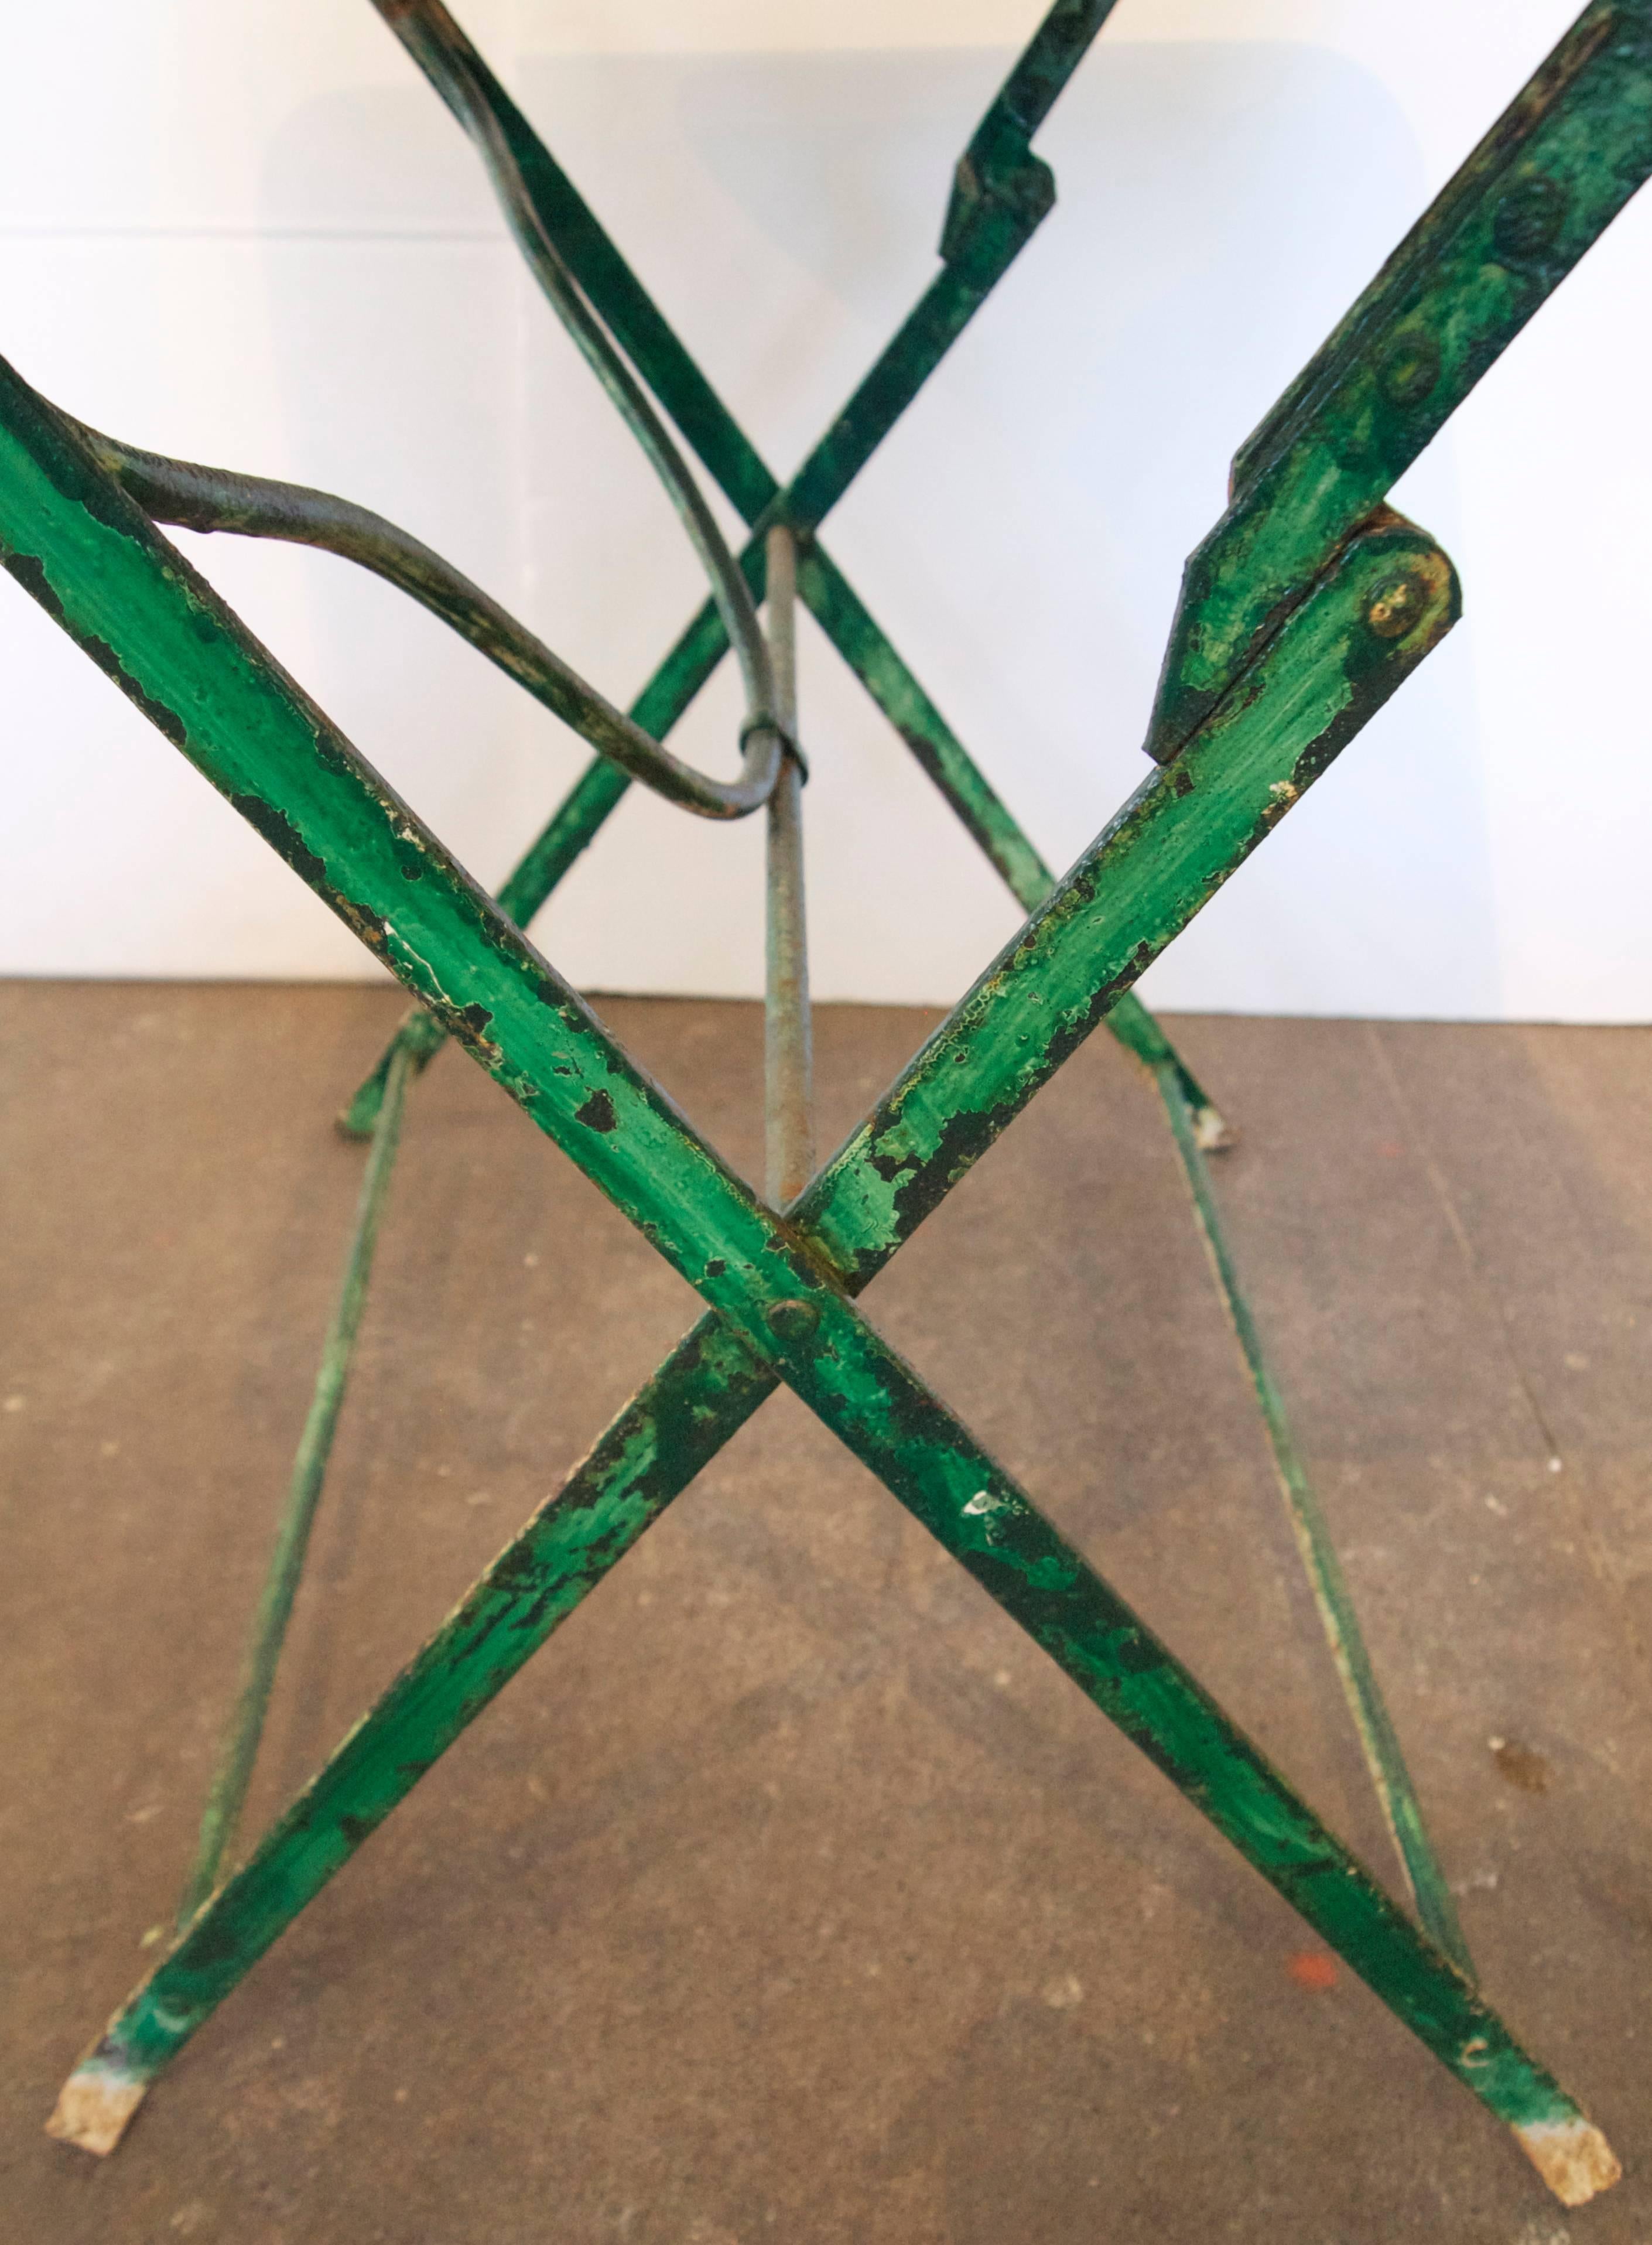 Green painted metal rectangular folding garden table.
Early 20th century,
France.